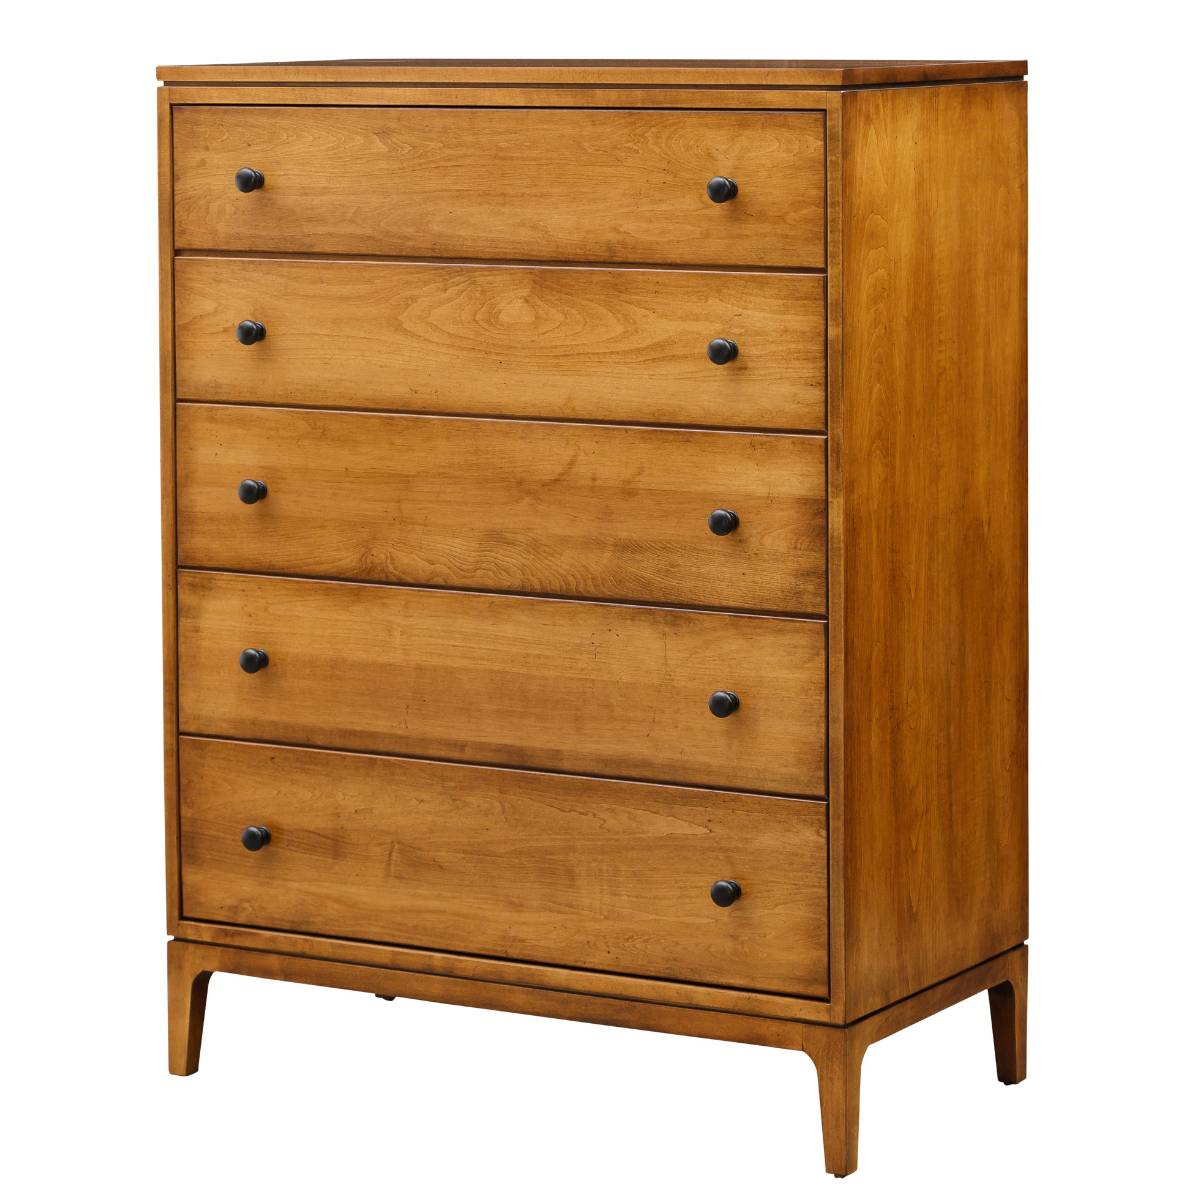 Kiel Chest of Drawers - snyders.furniture